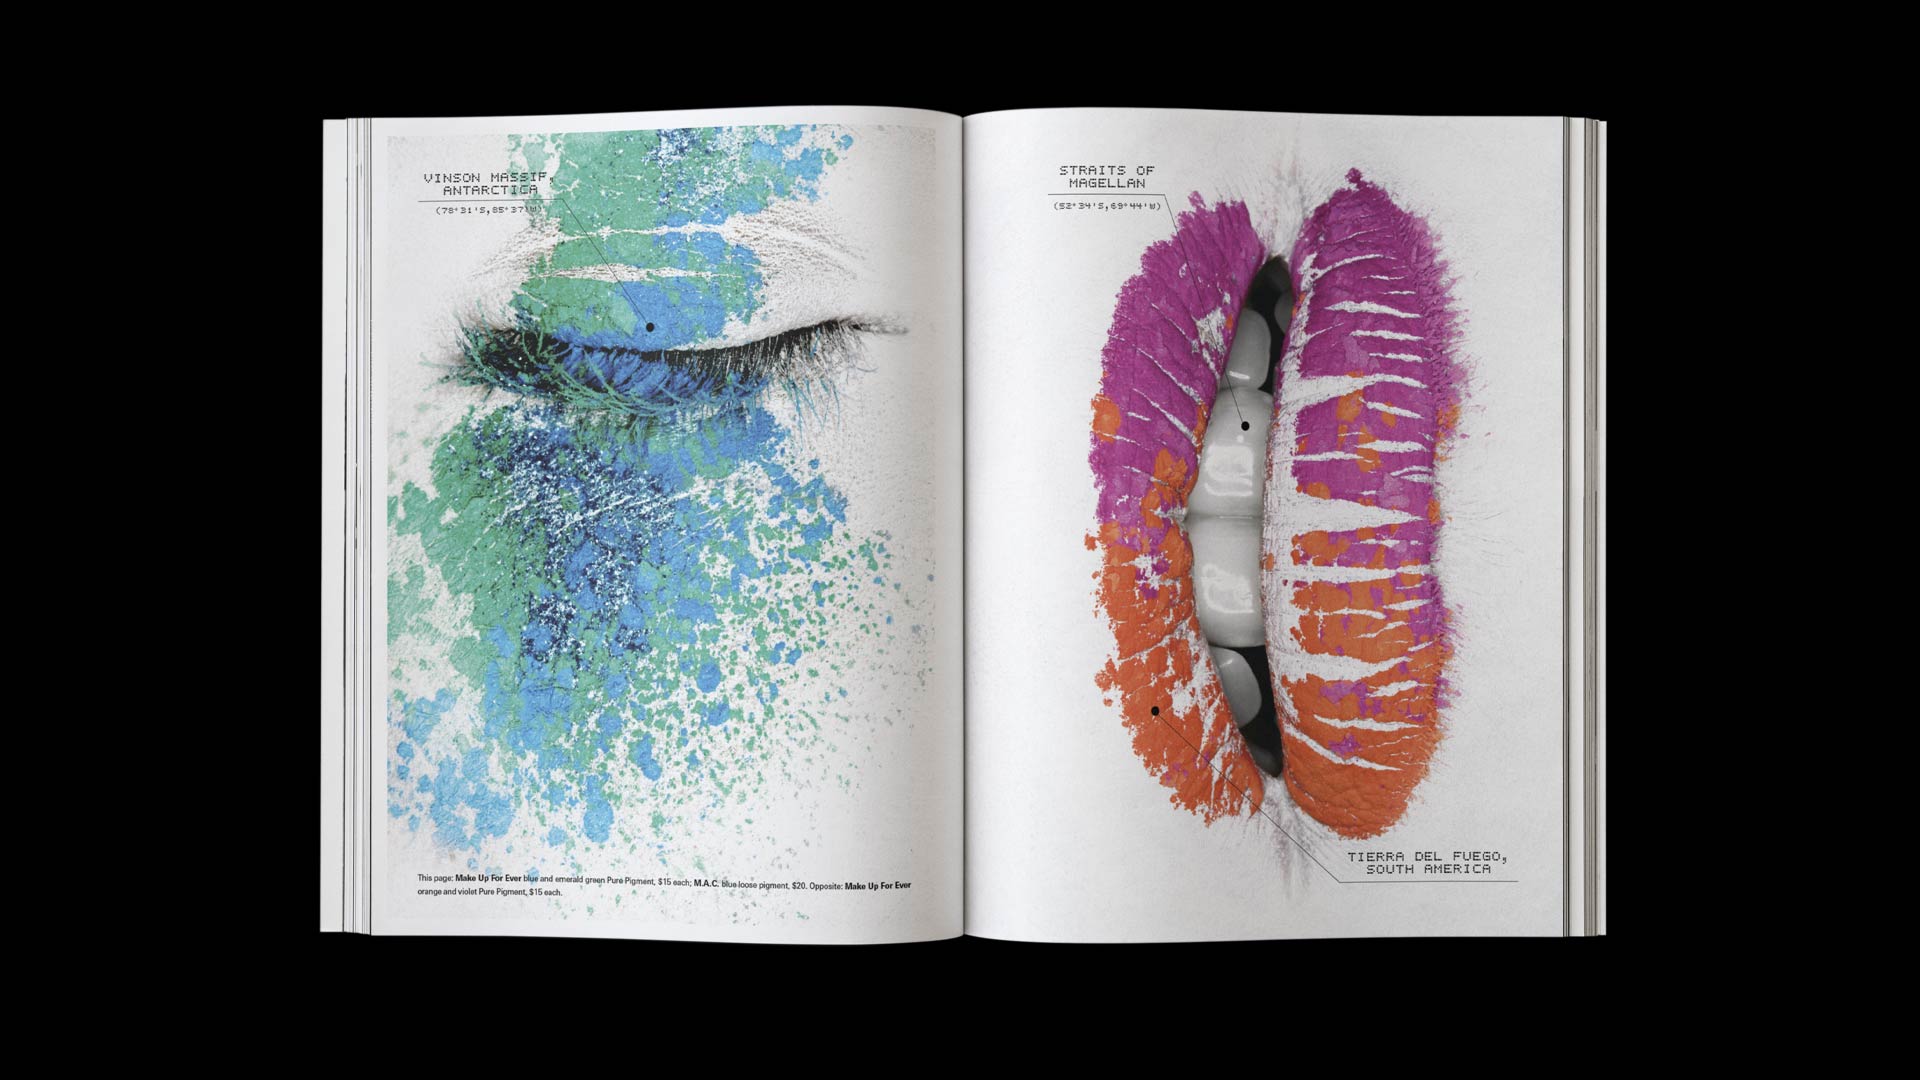 Close-up photographs of a model's eye with blue and green eyeshadow and colorful feather lips, juxtaposed with satellite imagery of Vinson Massif in Antarctica and the Straits of Magellan in South America, from the "Satellite of Love" beauty editorial in City Magazine, photographed by Thomas Rusch with makeup by Loni Baur and creative direction by Fabrice Frere of PlanetFab.